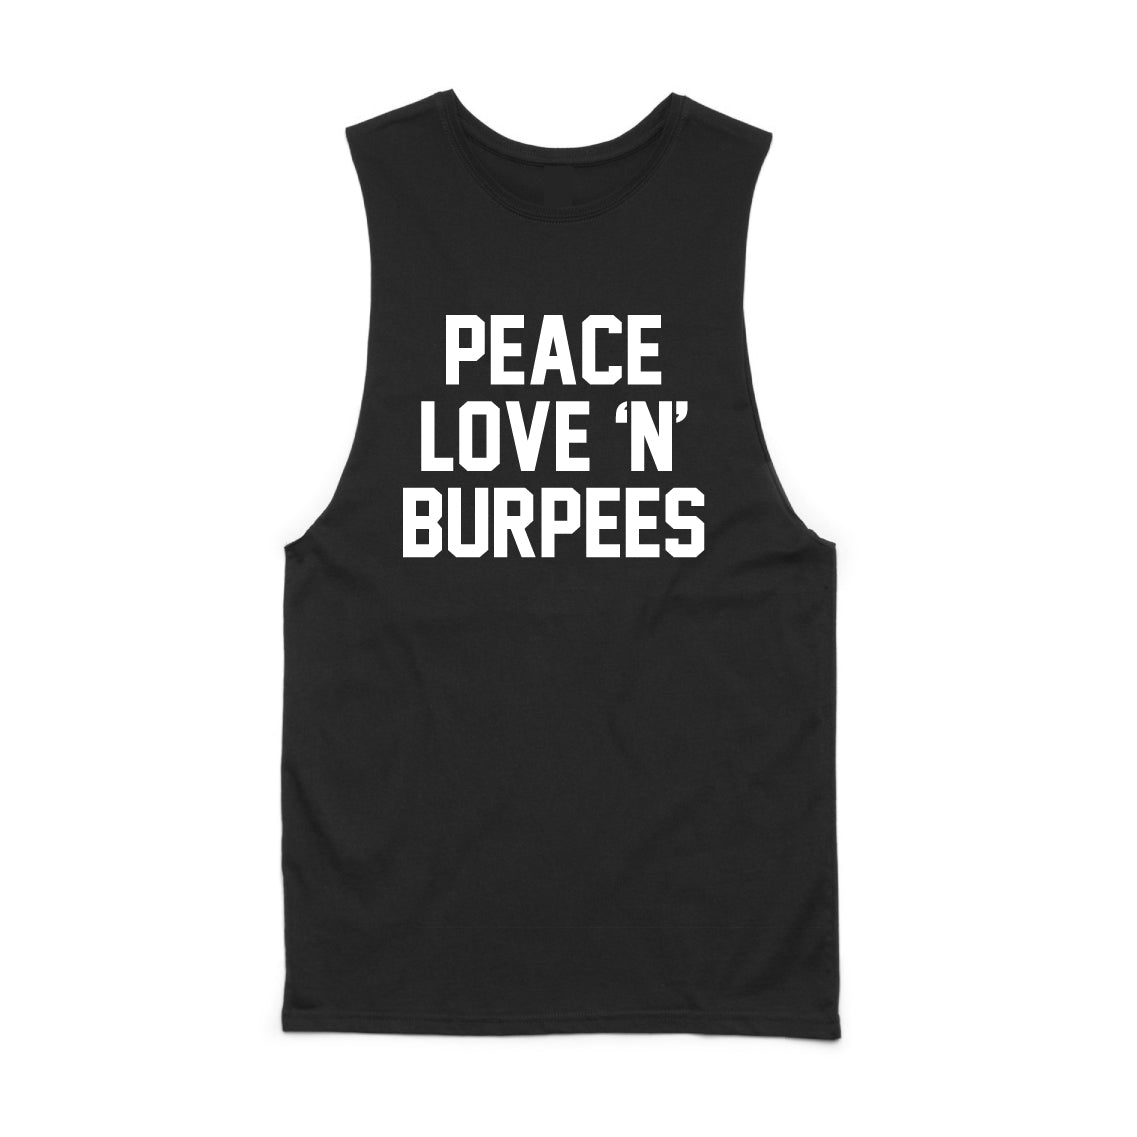 PEACE LOVE 'N' BURPEES MUSCLE TANK - L (Available)